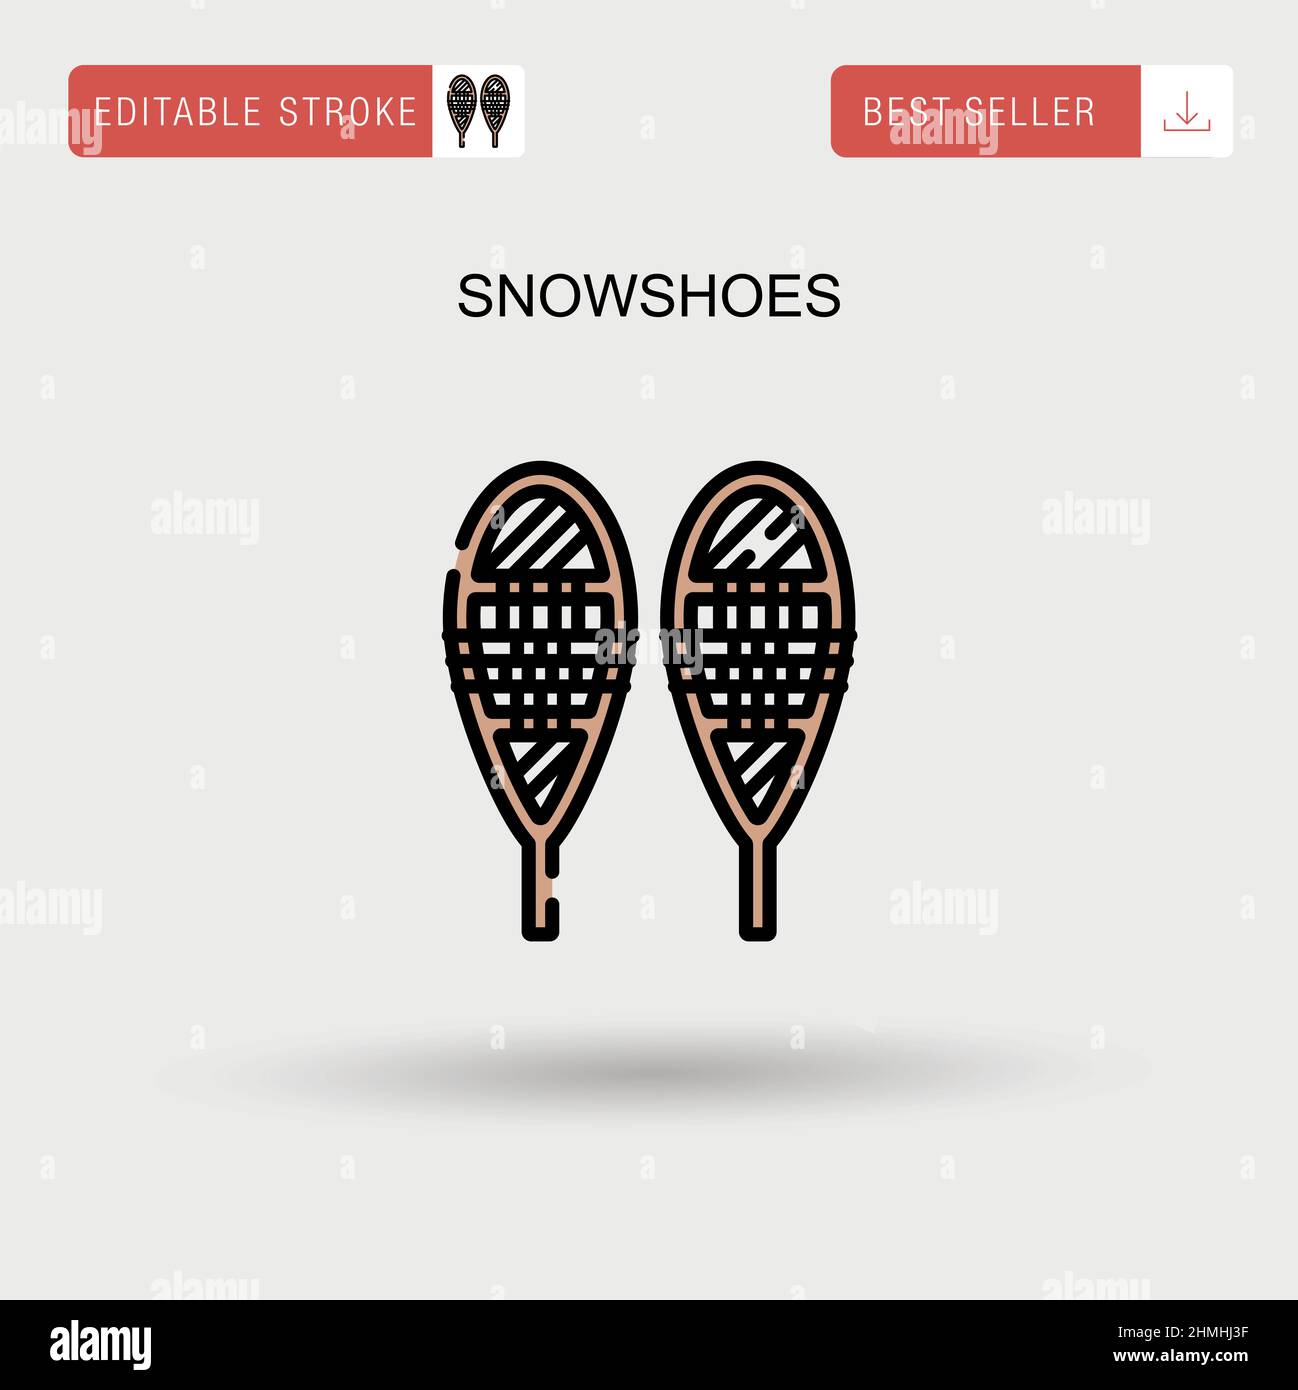 Snowshoes Simple vector icon. Stock Vector